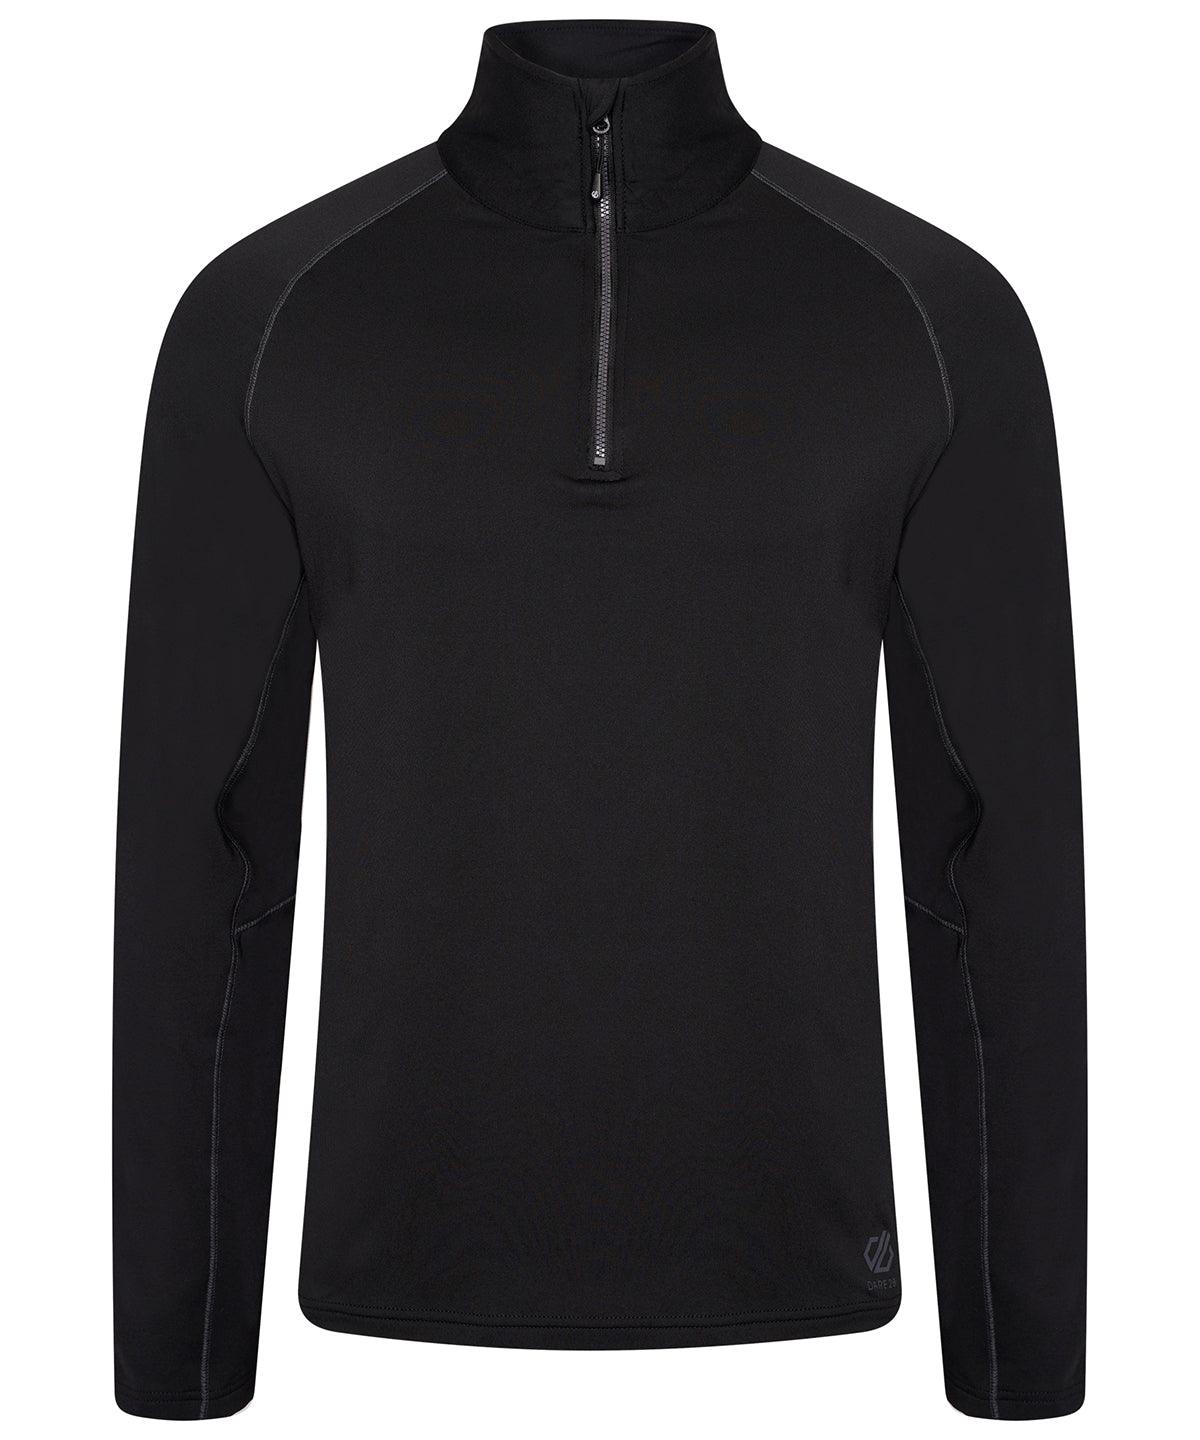 Black - Fuser 1/4 zip core stretch Sports Overtops Dare 2B Jackets - Fleece, New For 2021, New In Autumn Winter, New In Mid Year, Recycled Schoolwear Centres